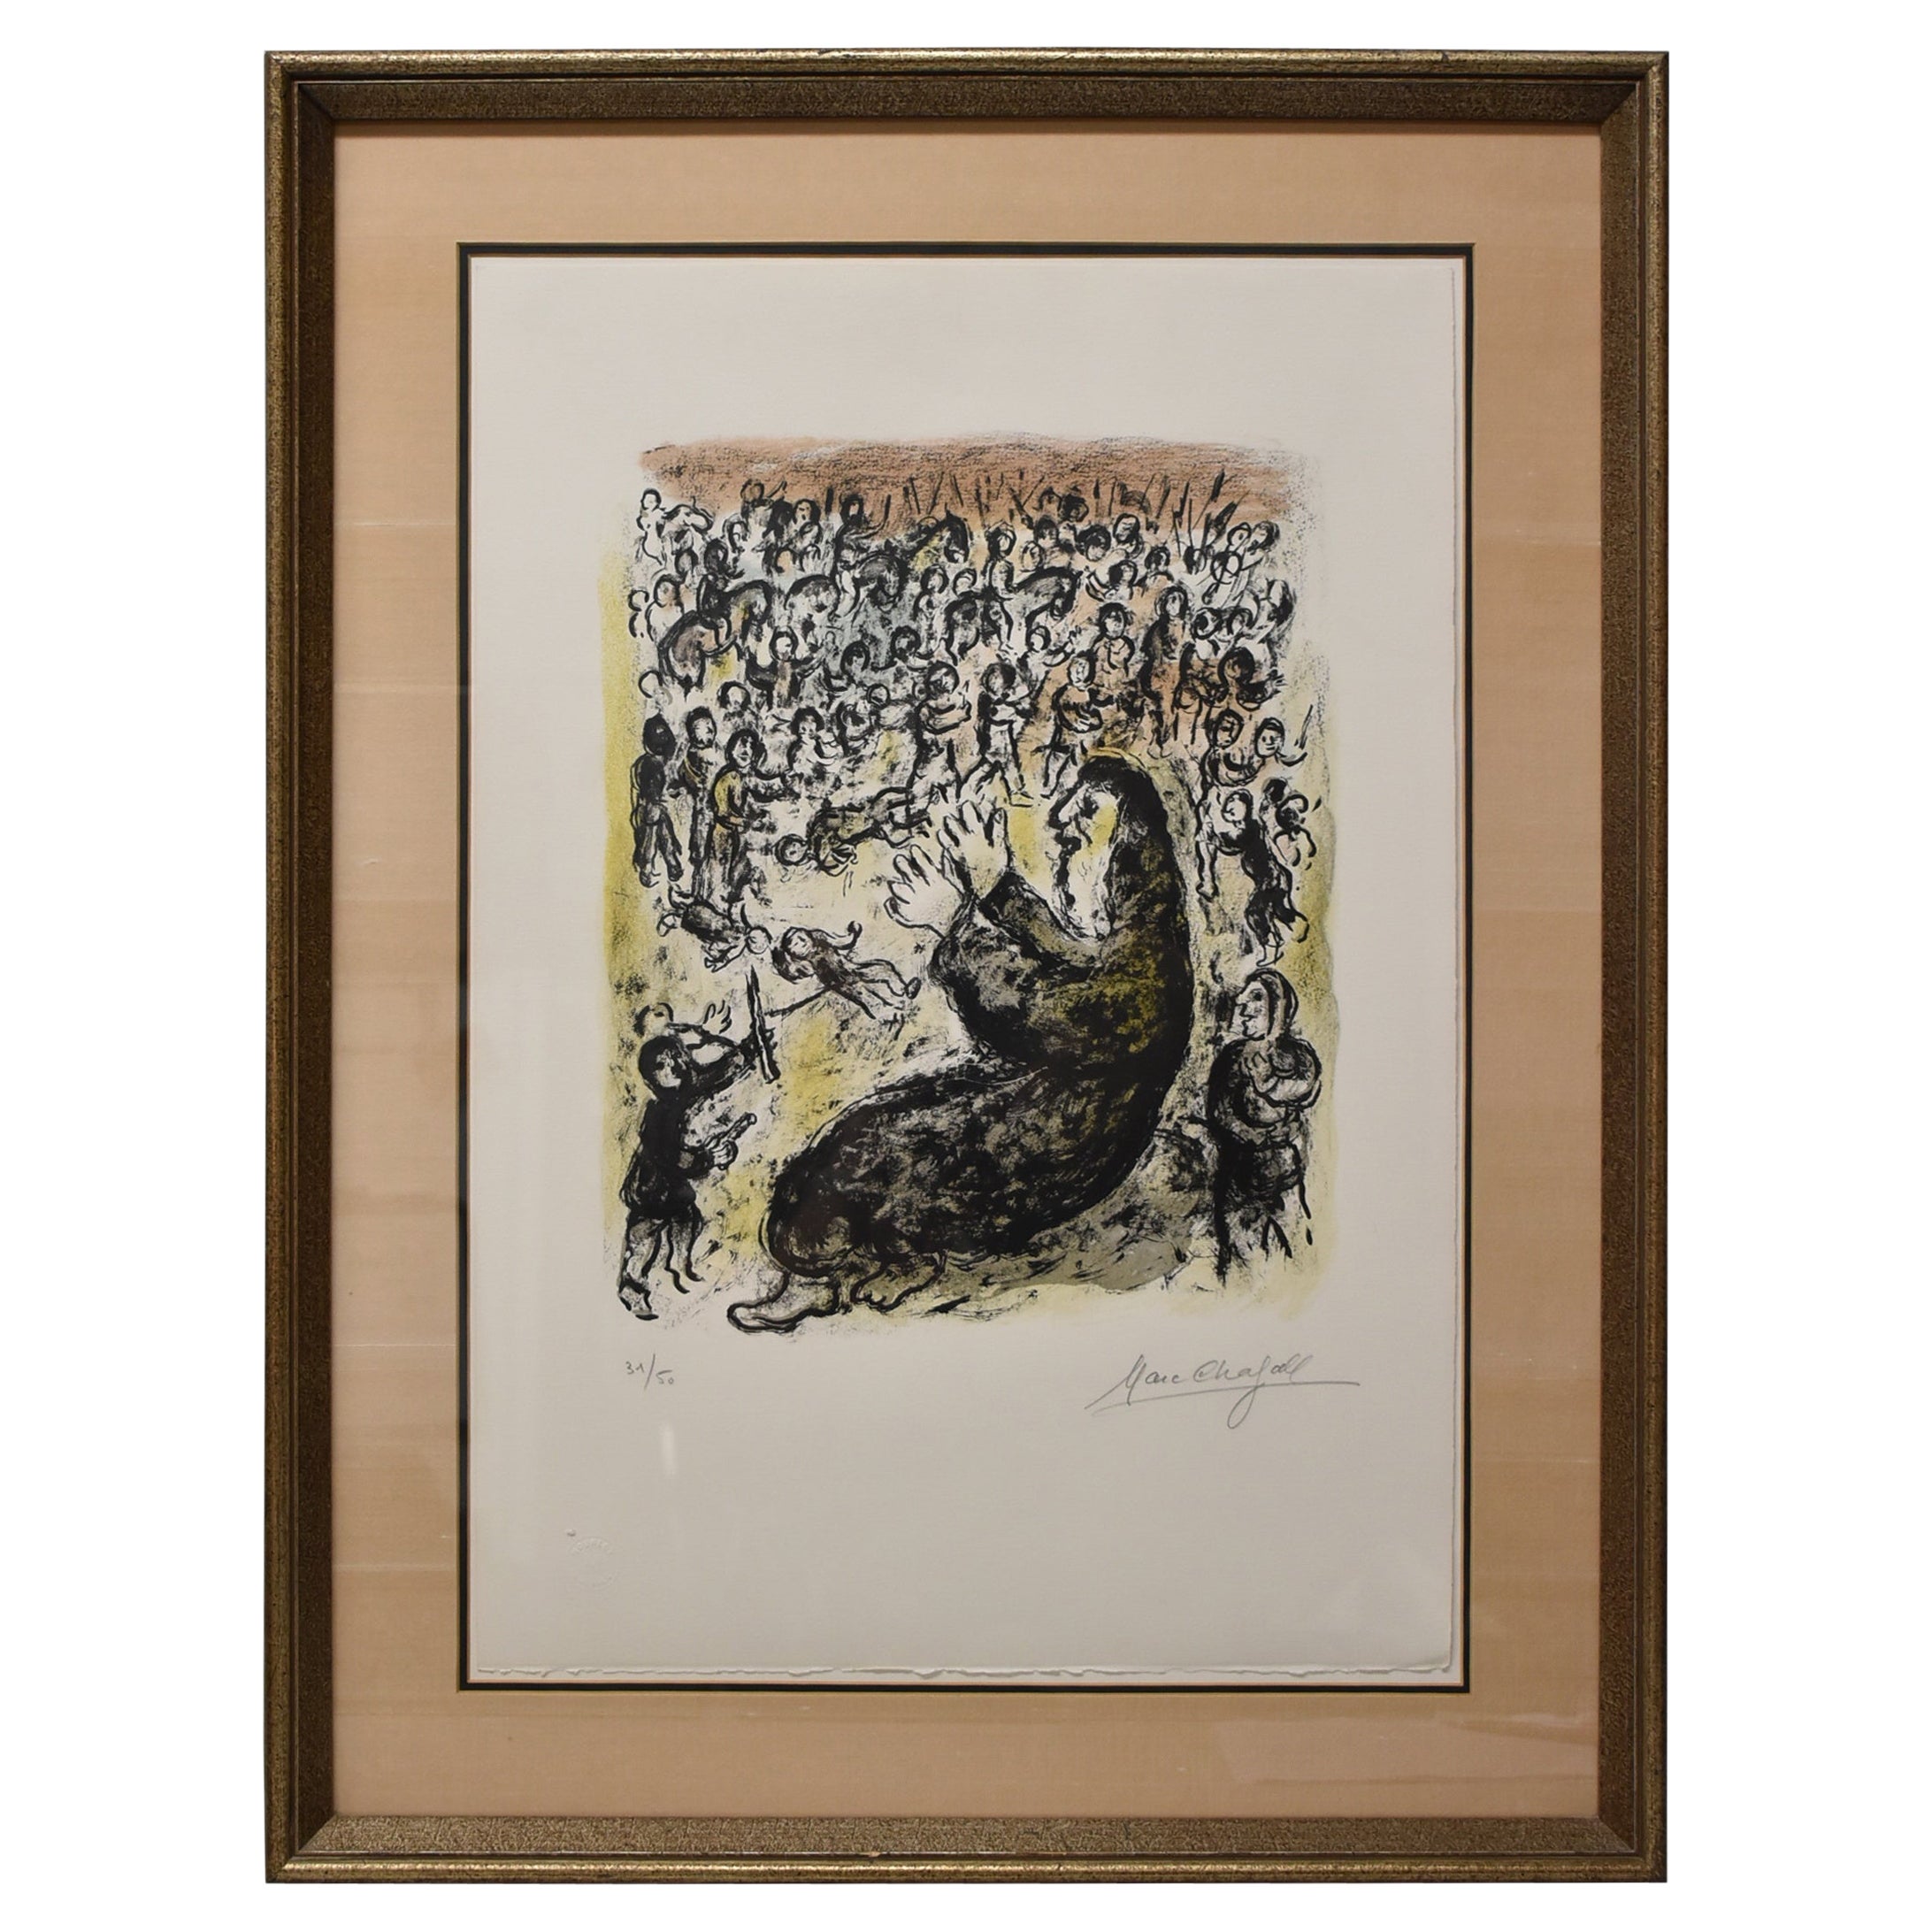 Marc Chagall Limited Edition Lithograph "Jeremiah" 37/50, Circa 1980